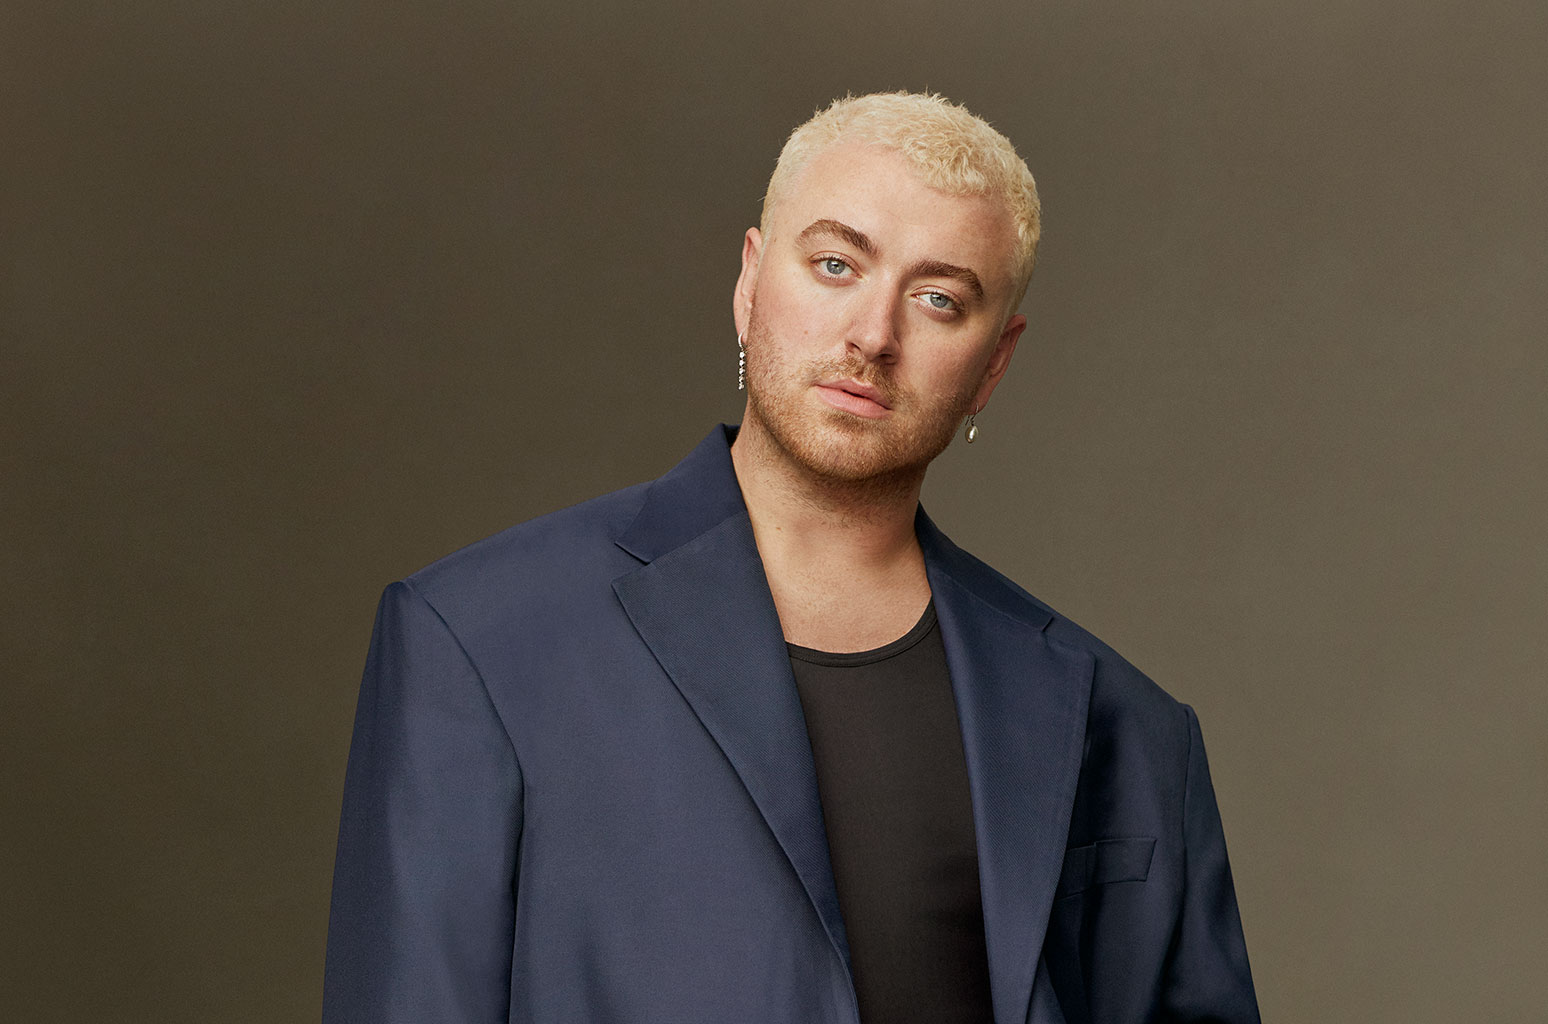 Sam Smith Biography: Songs, Wife, Net Worth, Albums, Age, Height, Girlfriend, Parents, Awards